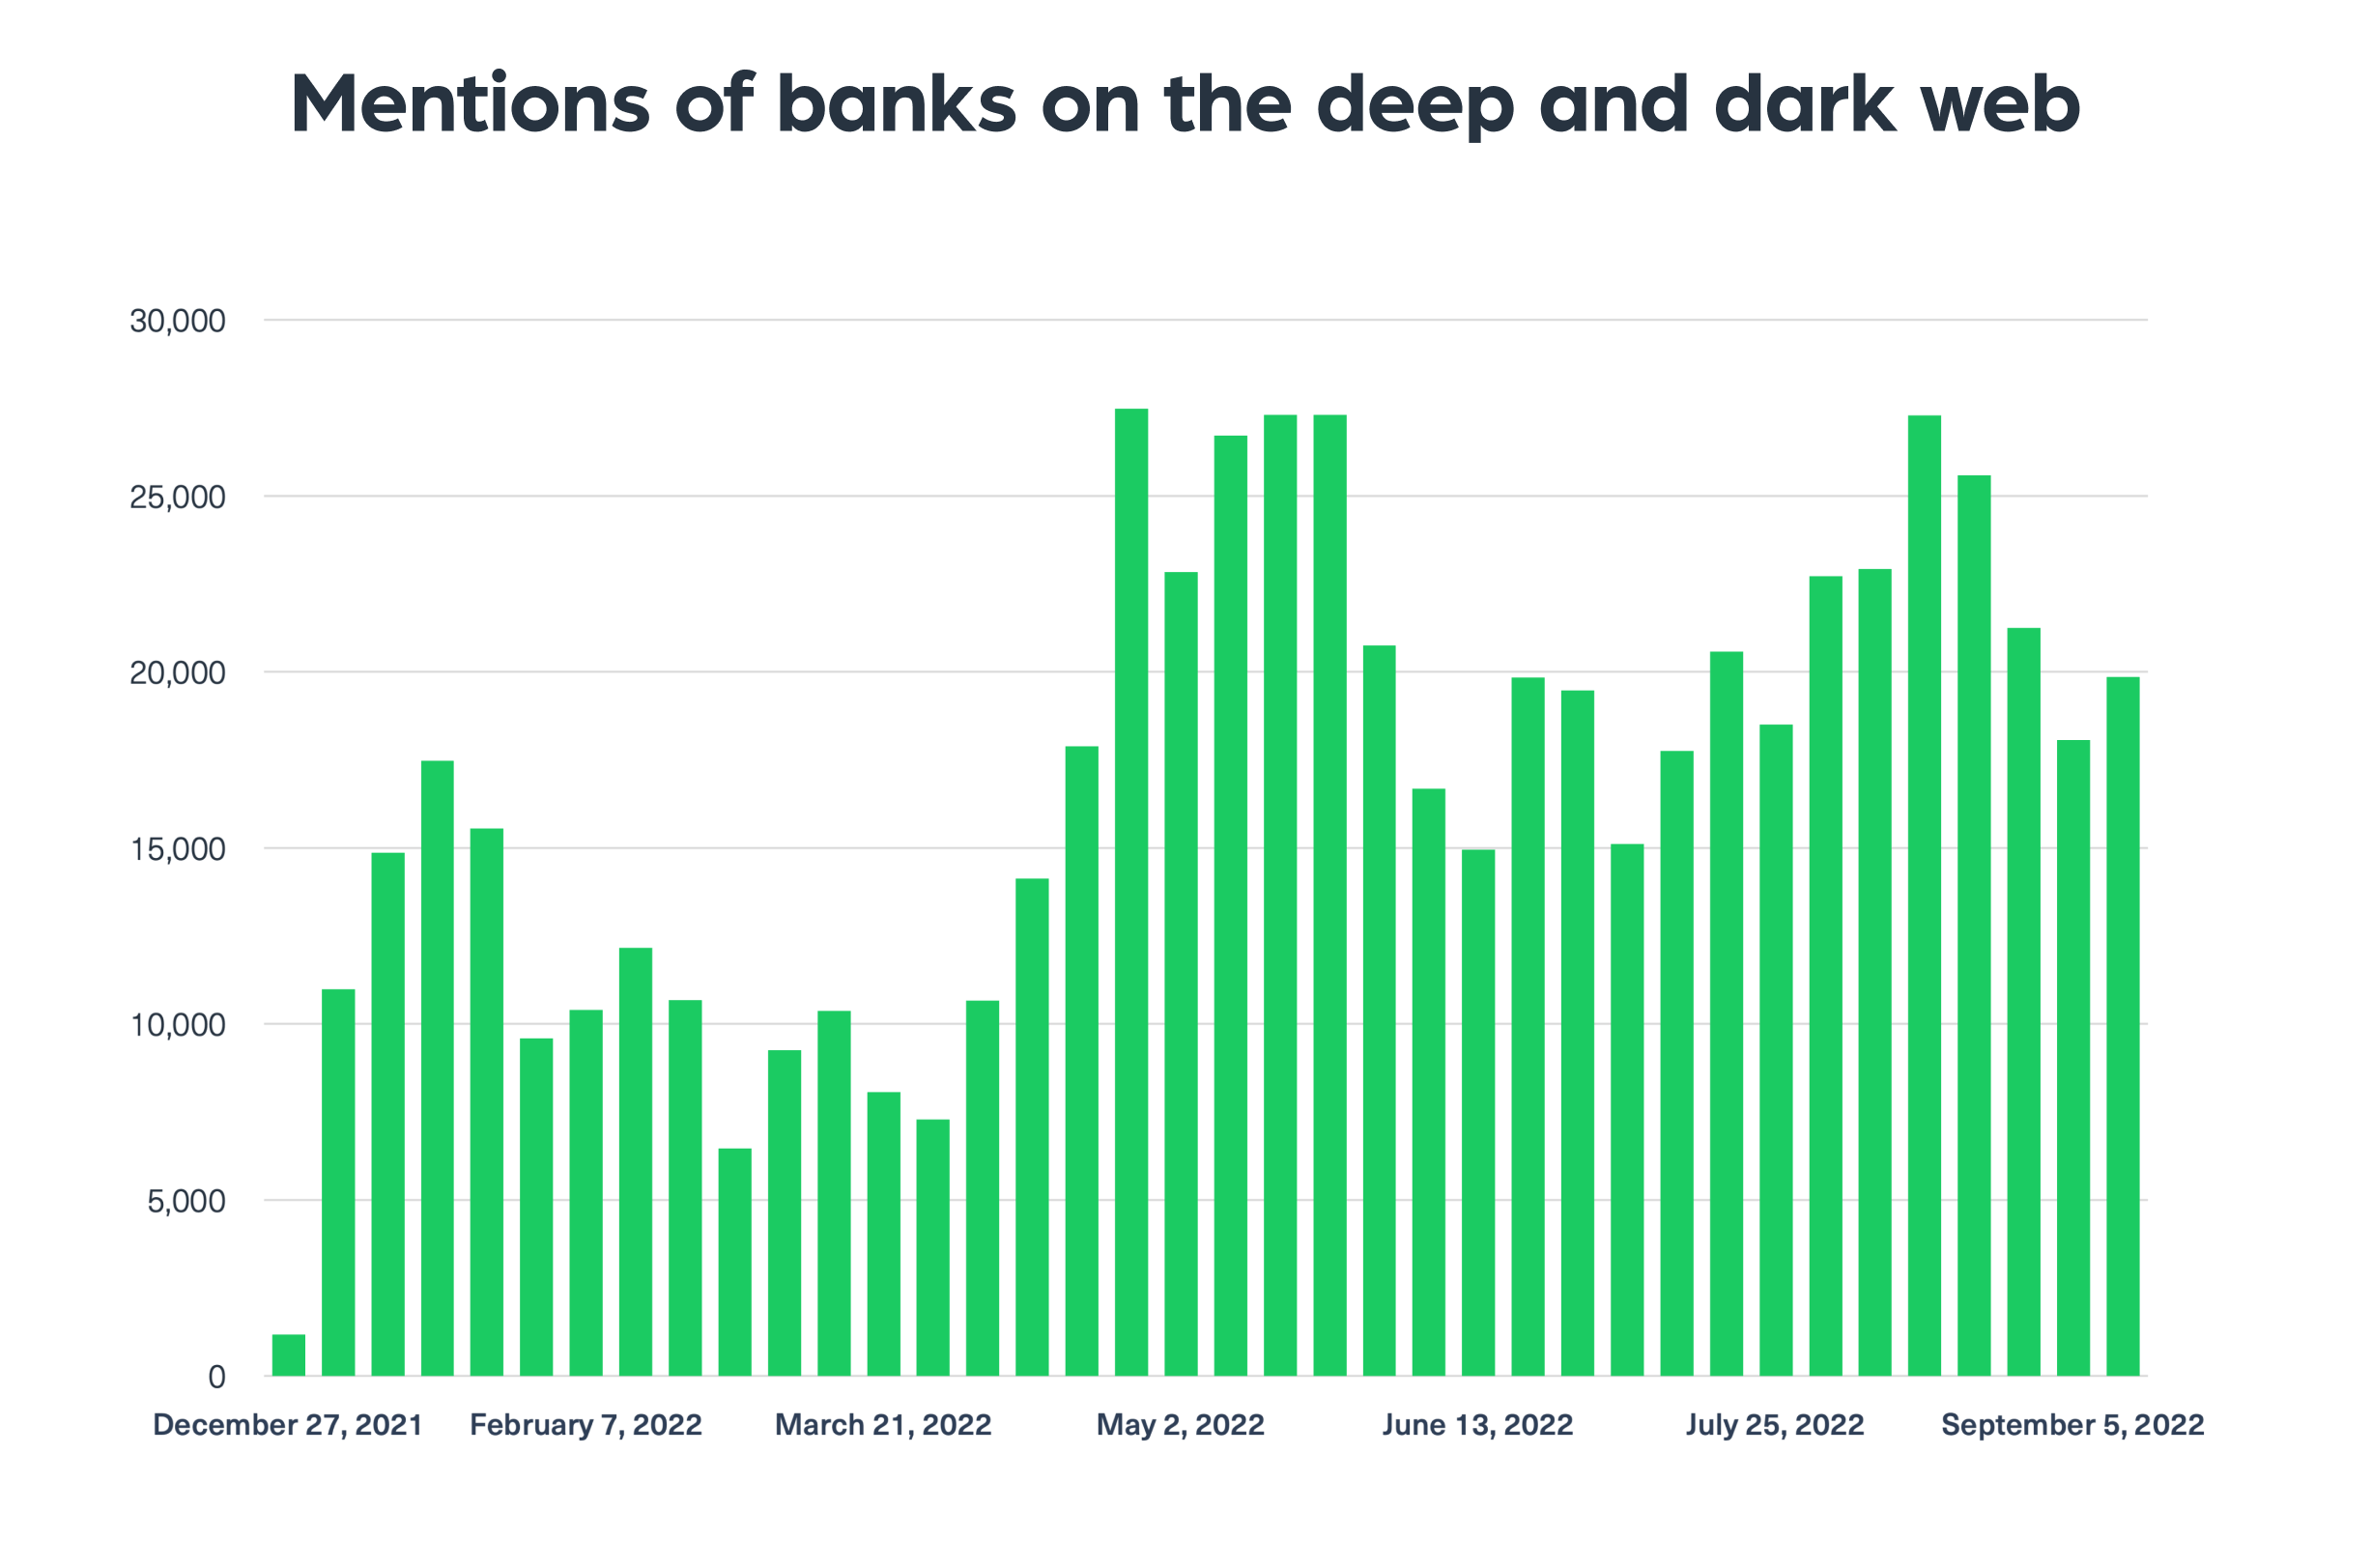 Mentions of banks on the deep and dark web